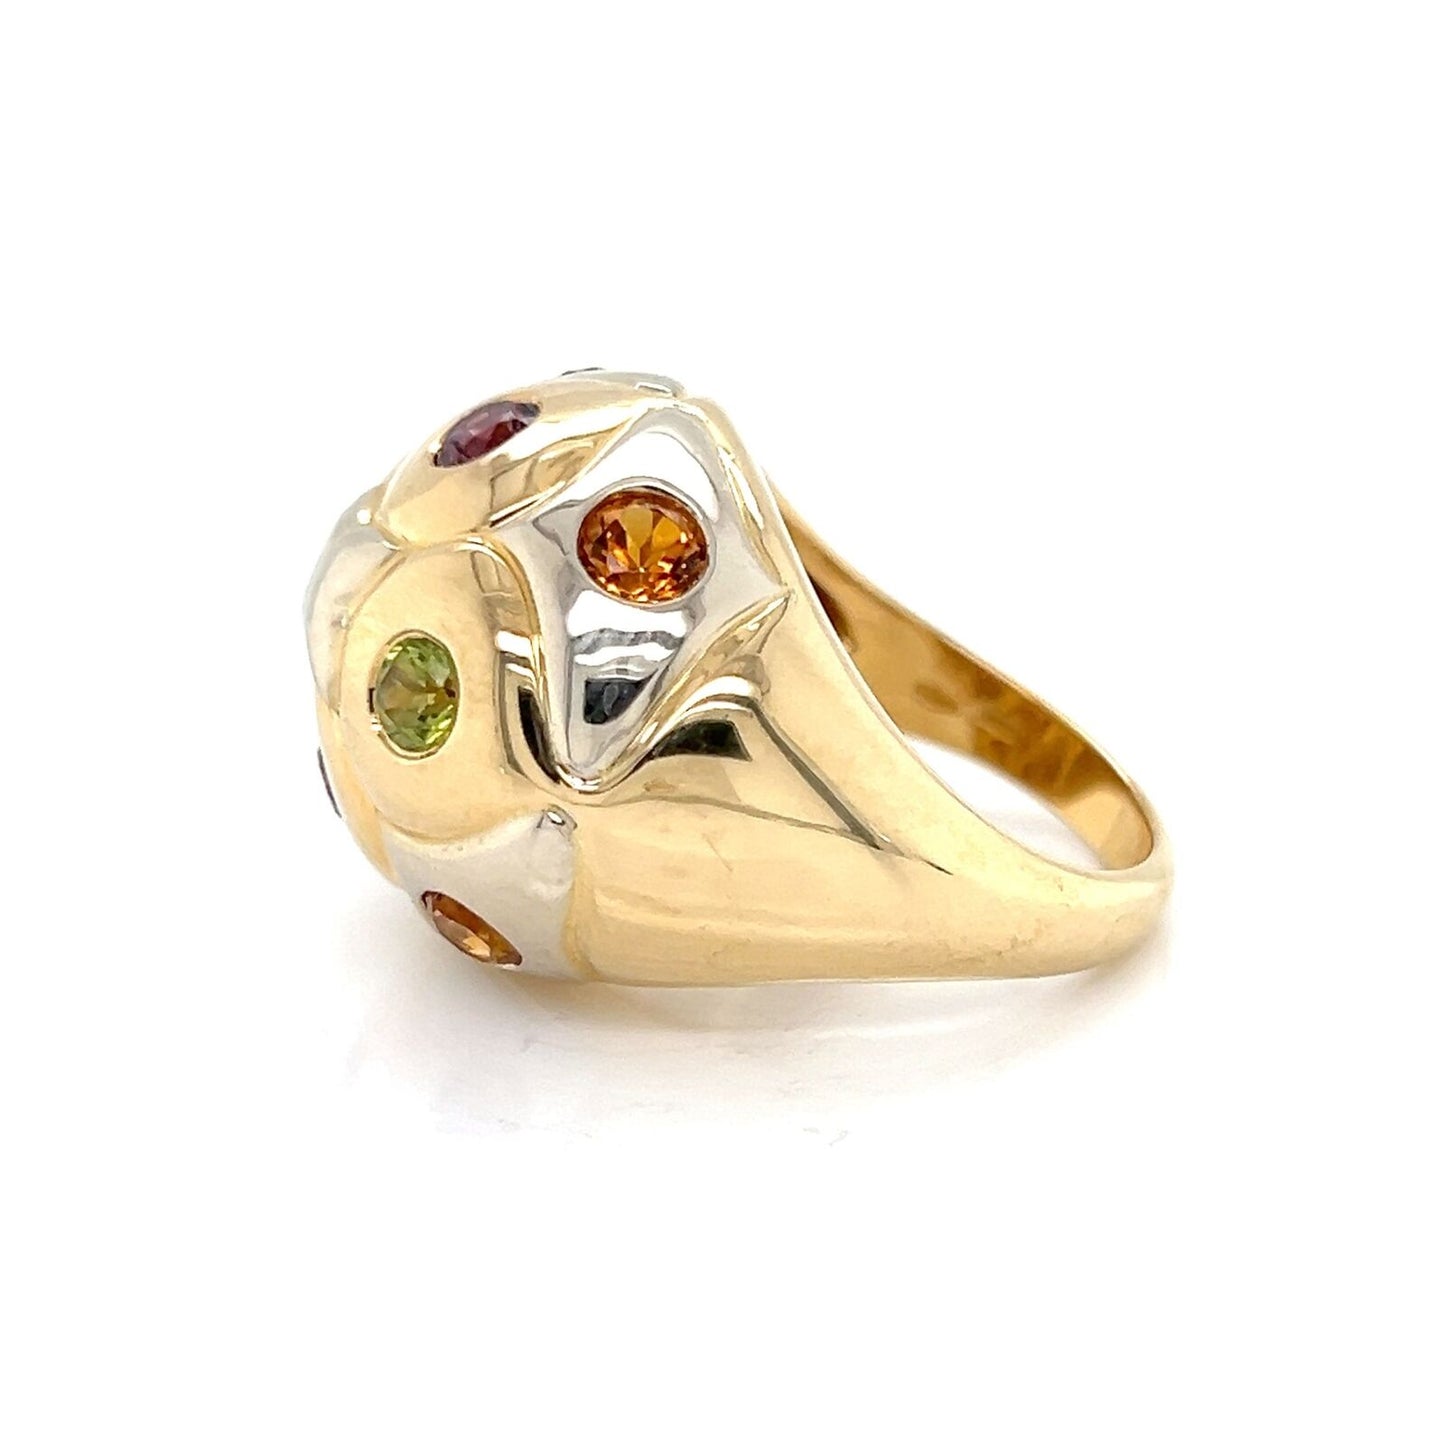 Bvlgari Multicolor Gems 18k Yellow Gold Dome Ring